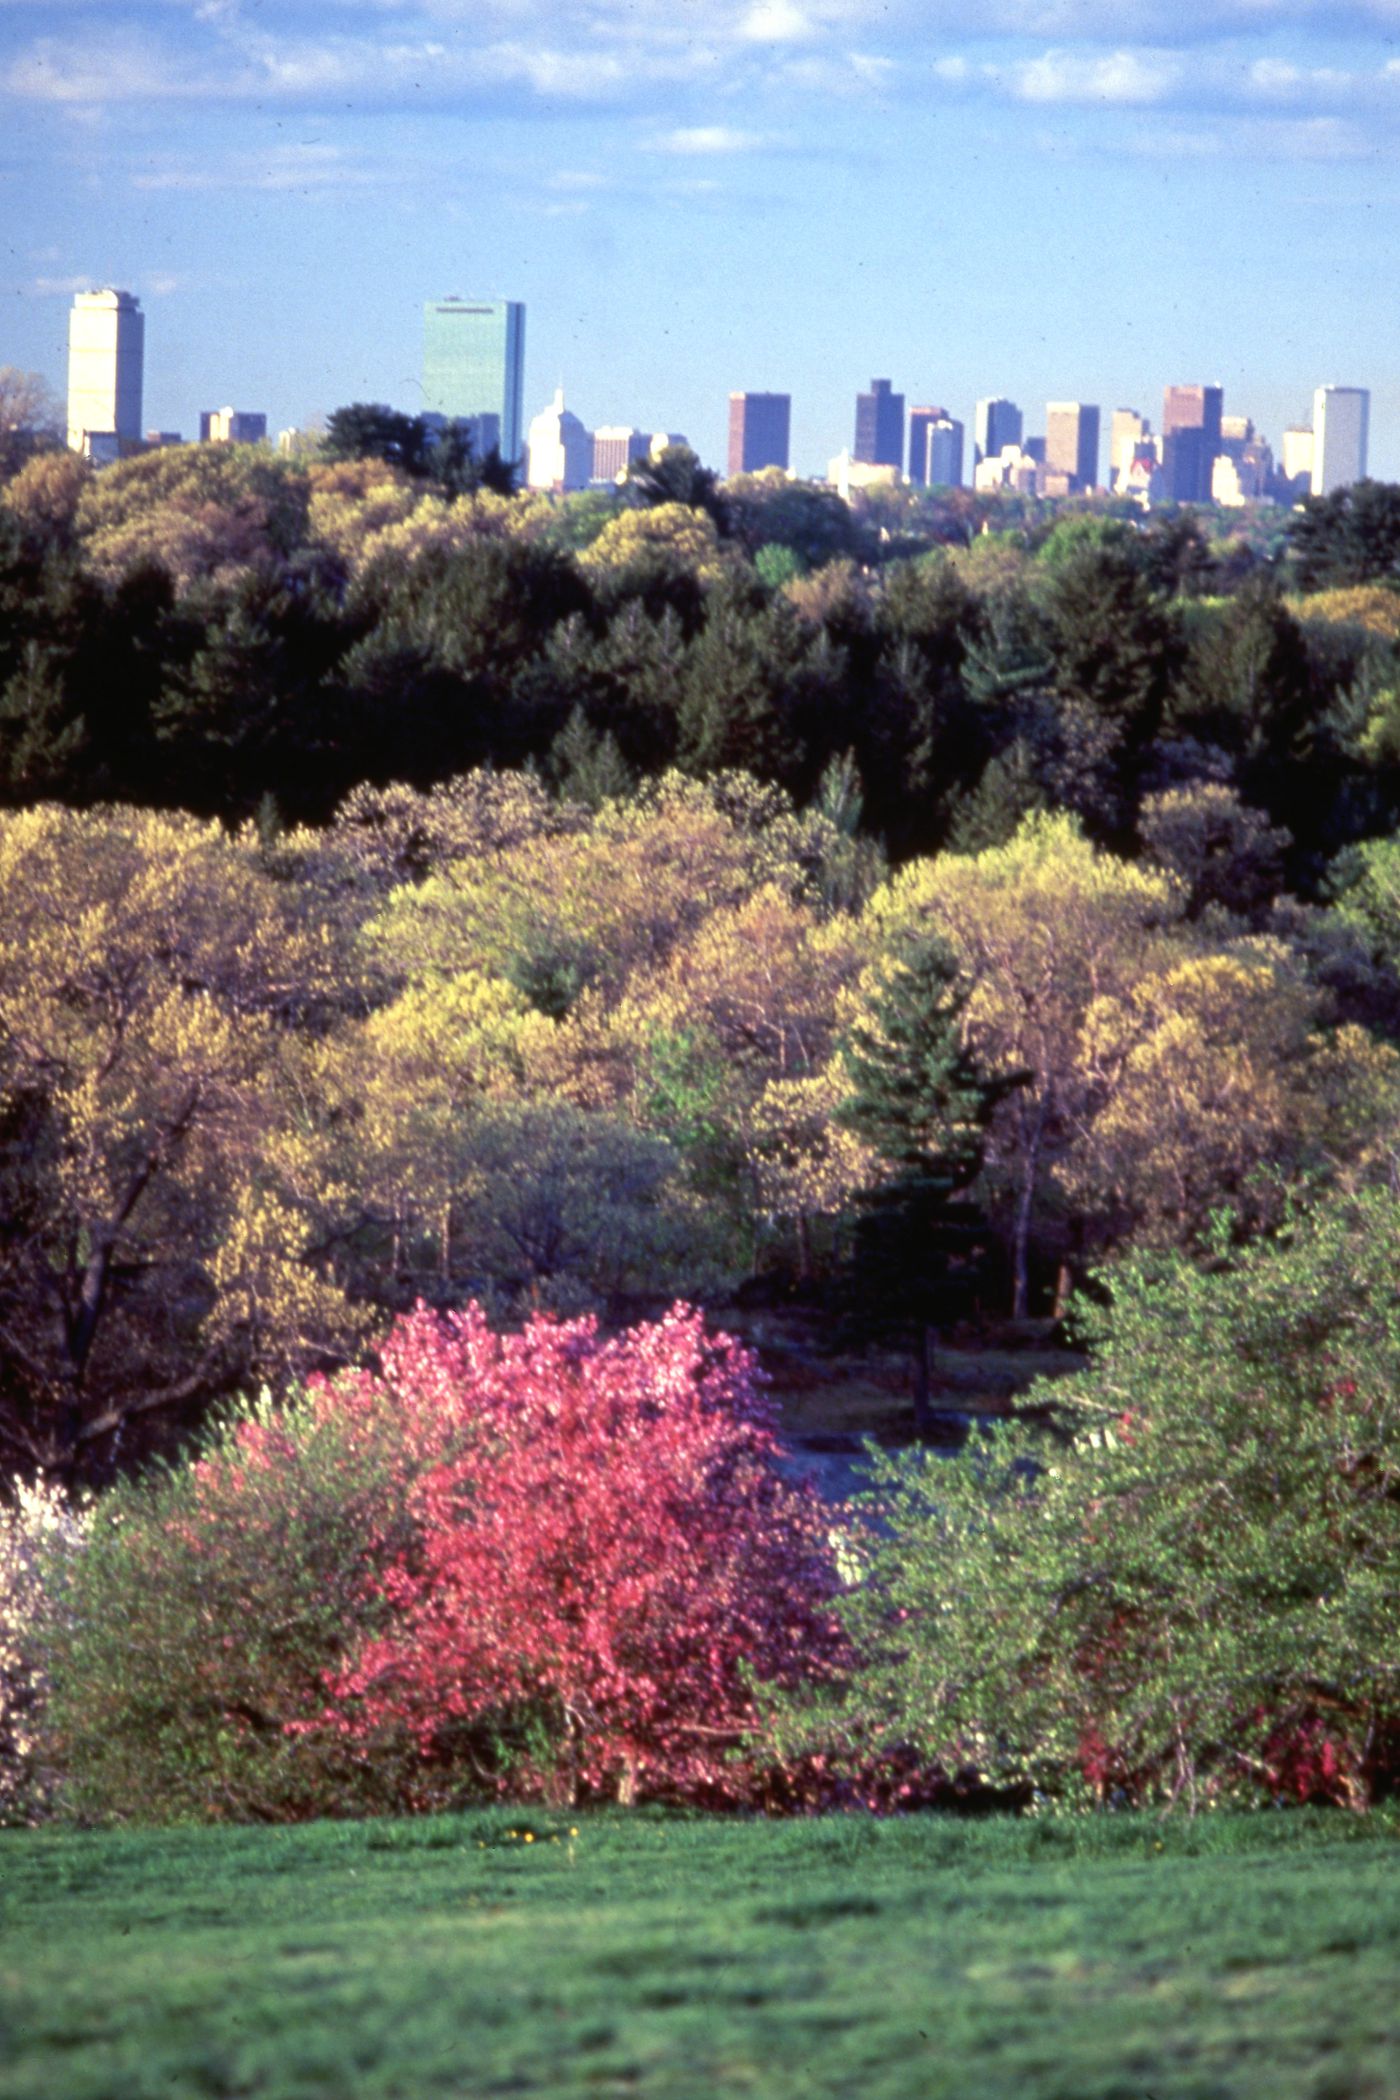 Photograph of a park with city skyline for research for Olmsted: L'origine del parco urbano e del parco naturale contemporaneo